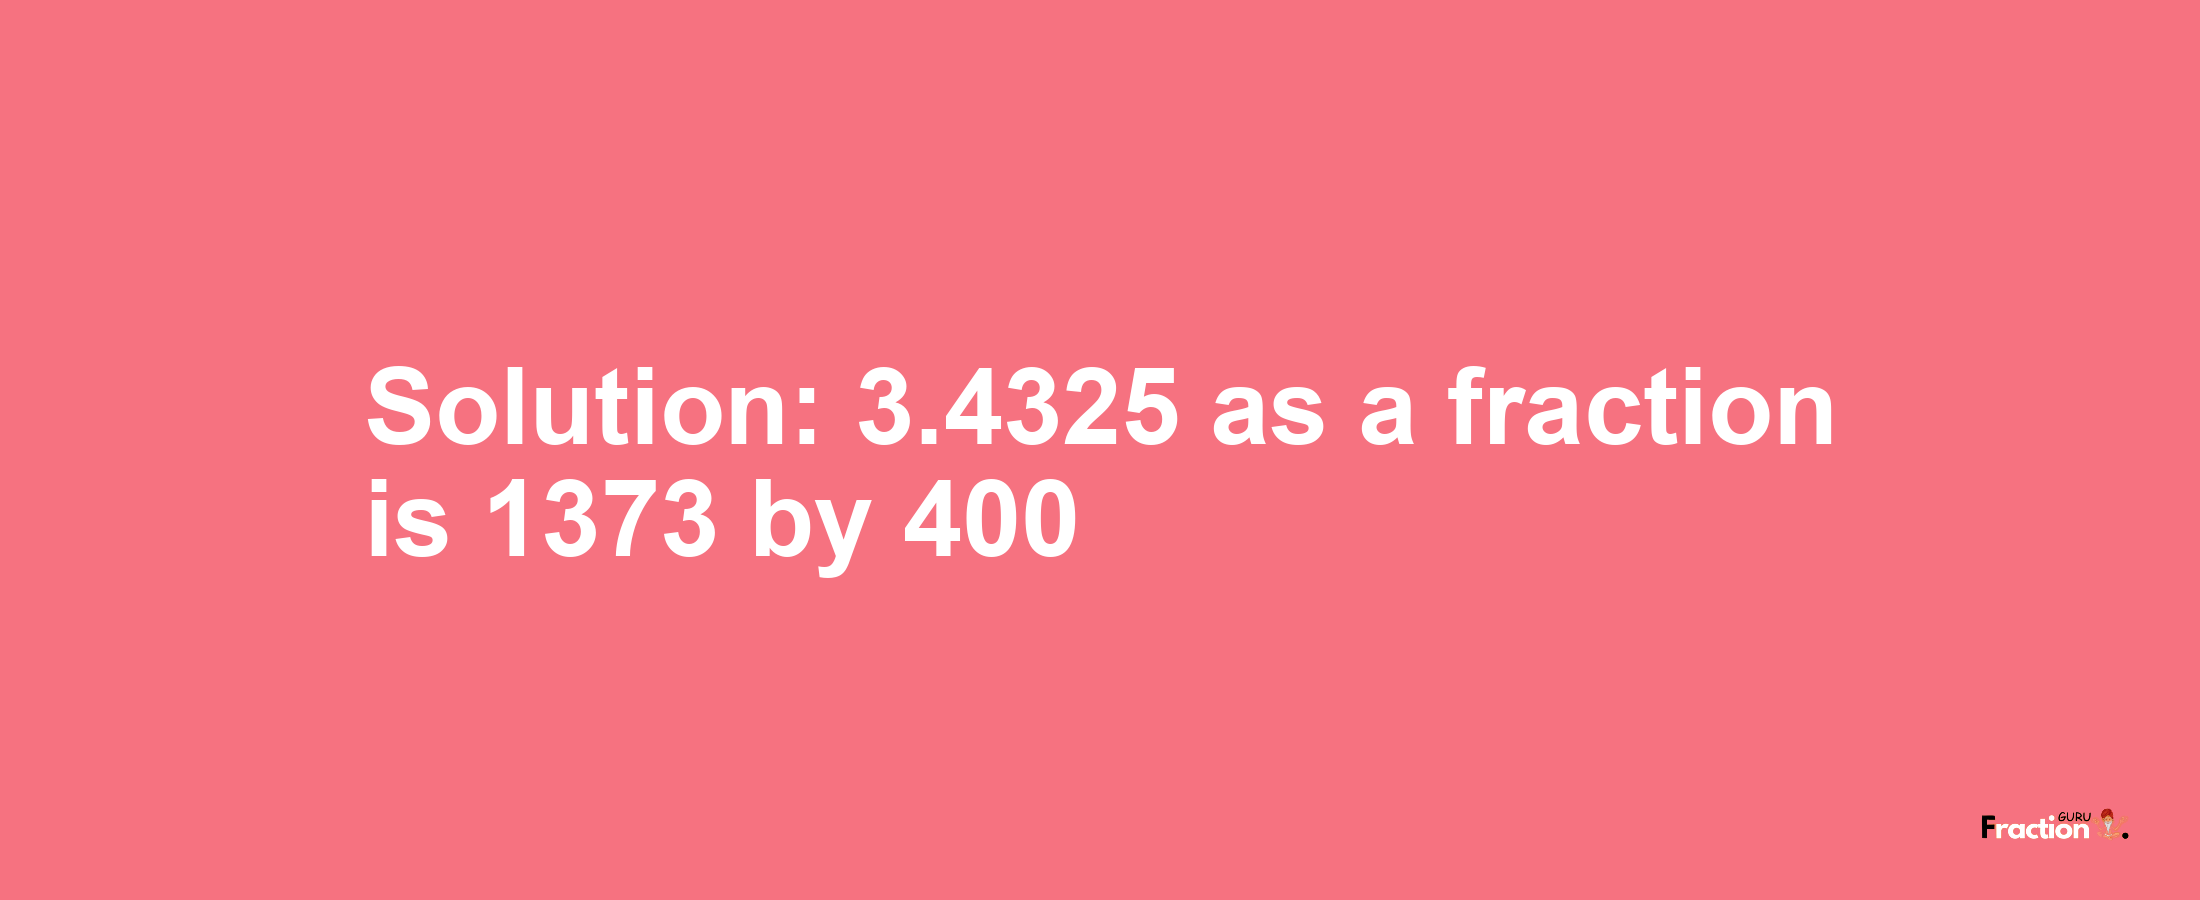 Solution:3.4325 as a fraction is 1373/400